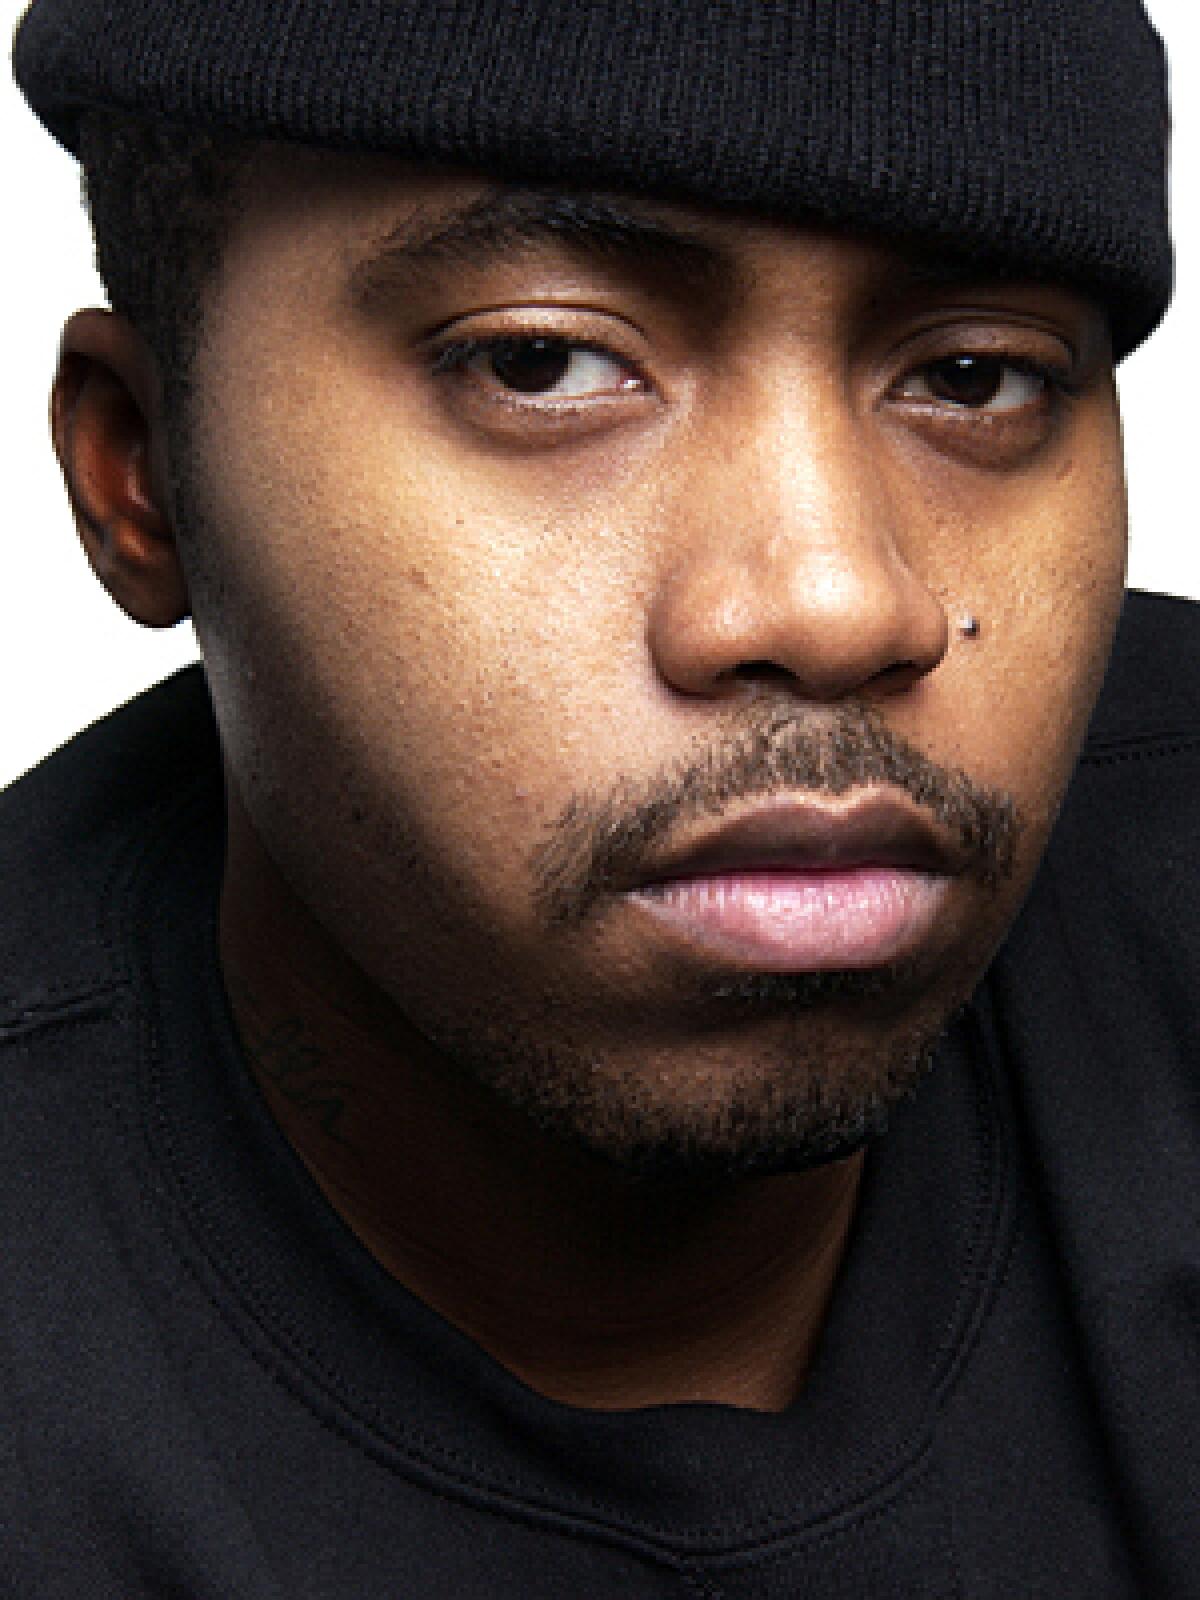 RAPPER: Nas opines about America and race on new CD.